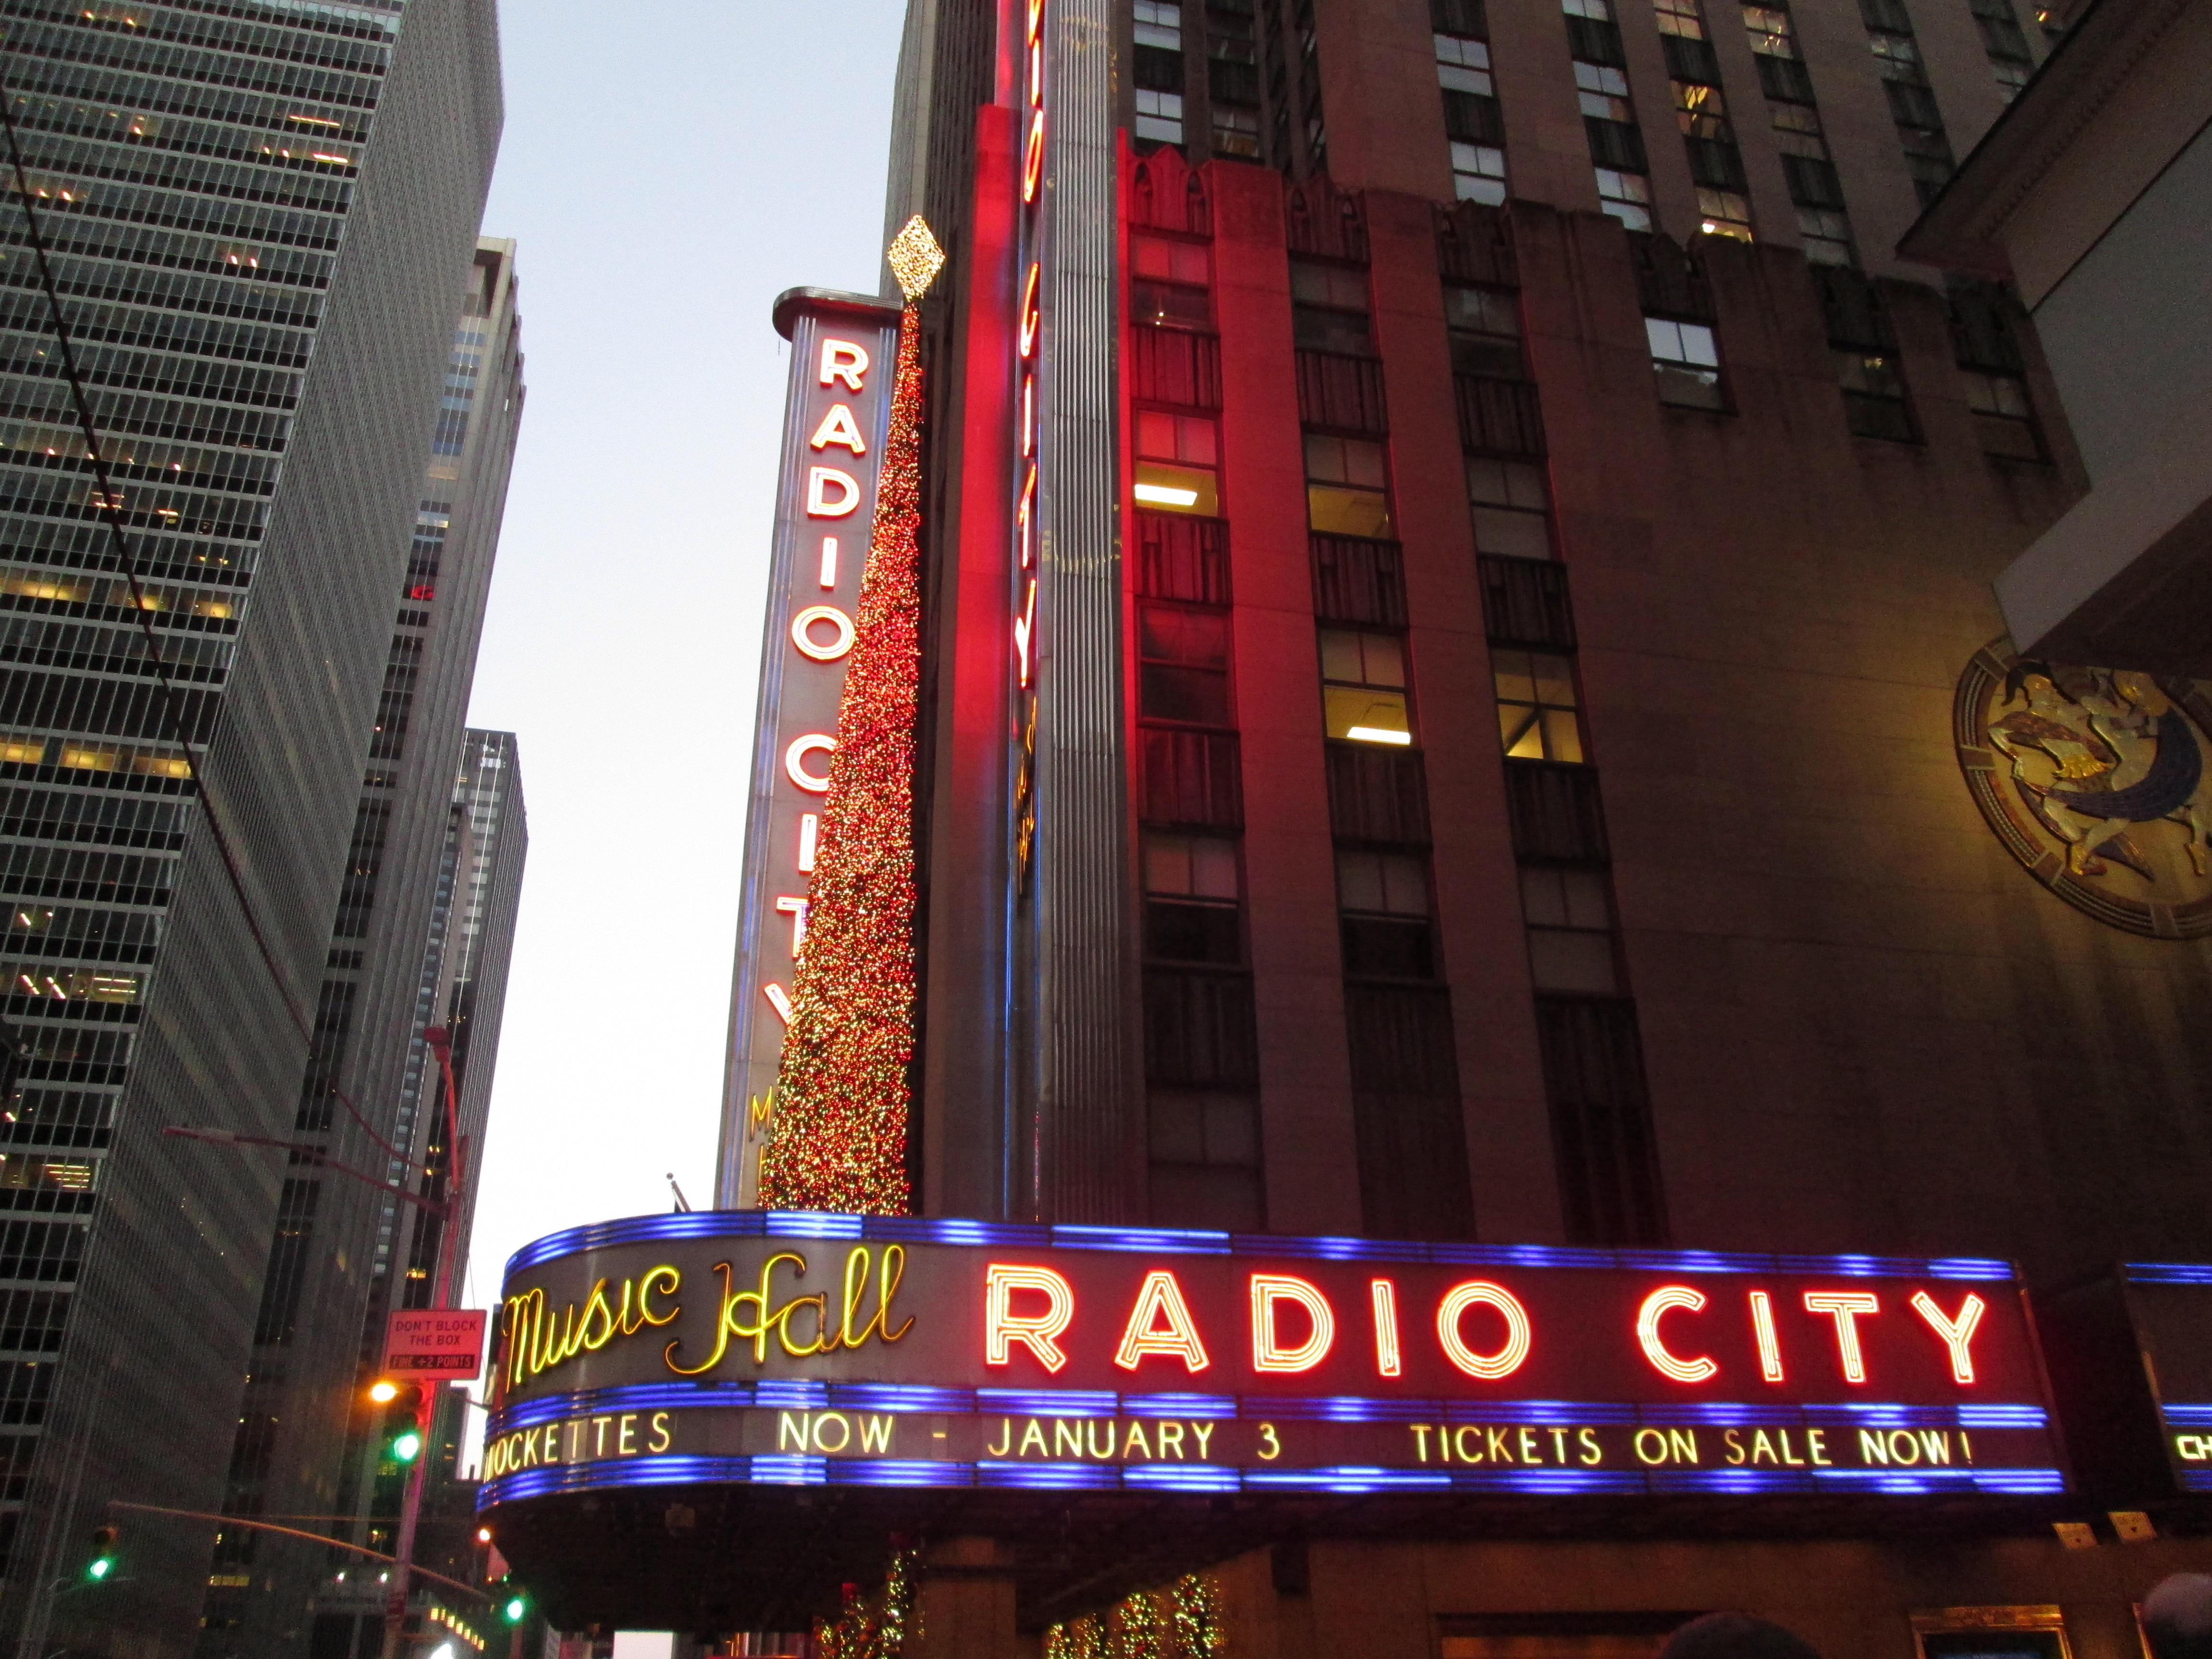 Review: Rockettes Radio City Christmas Spectacular